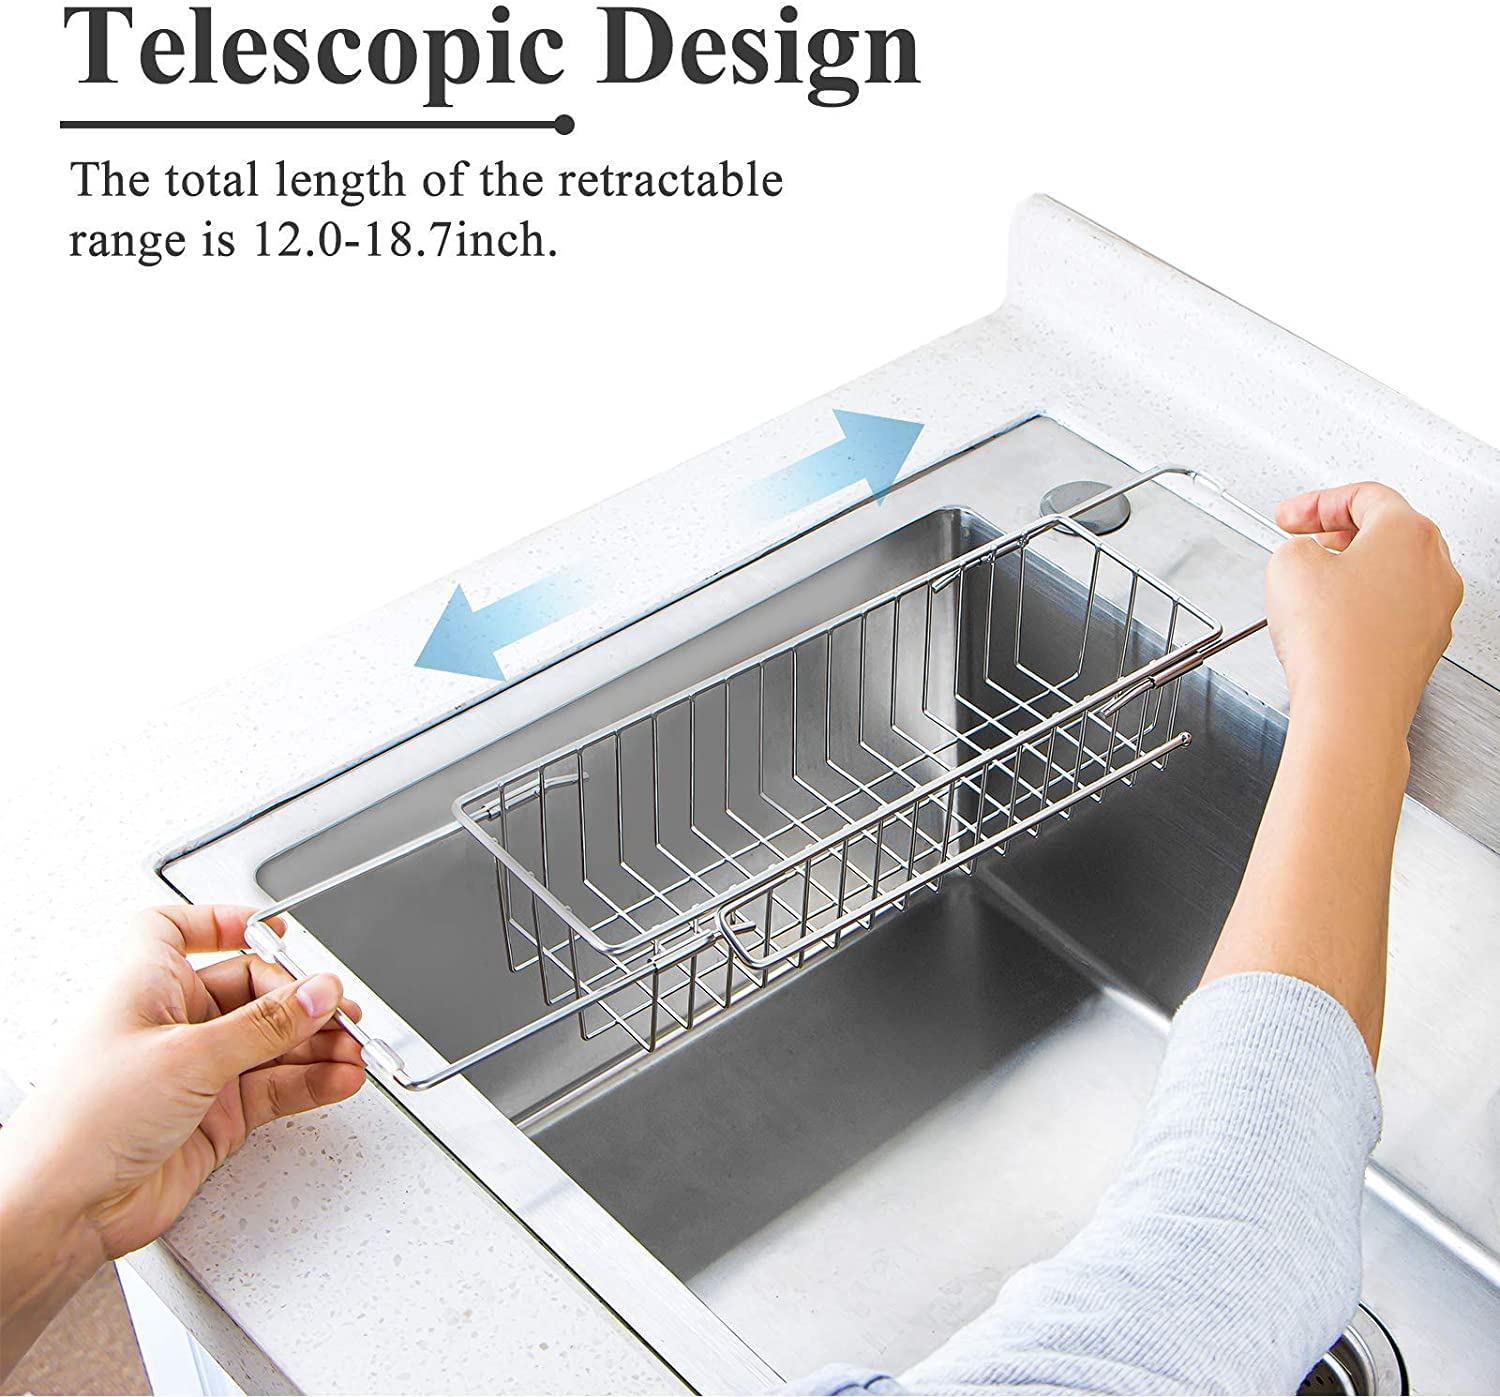 Telescopic Kitchen Sink Organizer Rack, Collapsible Stainless Steel Sink Caddy Drainer with Towel Drying Rack, Sink Basket with Dishcloth Hanger, Soap and Sponge Holder